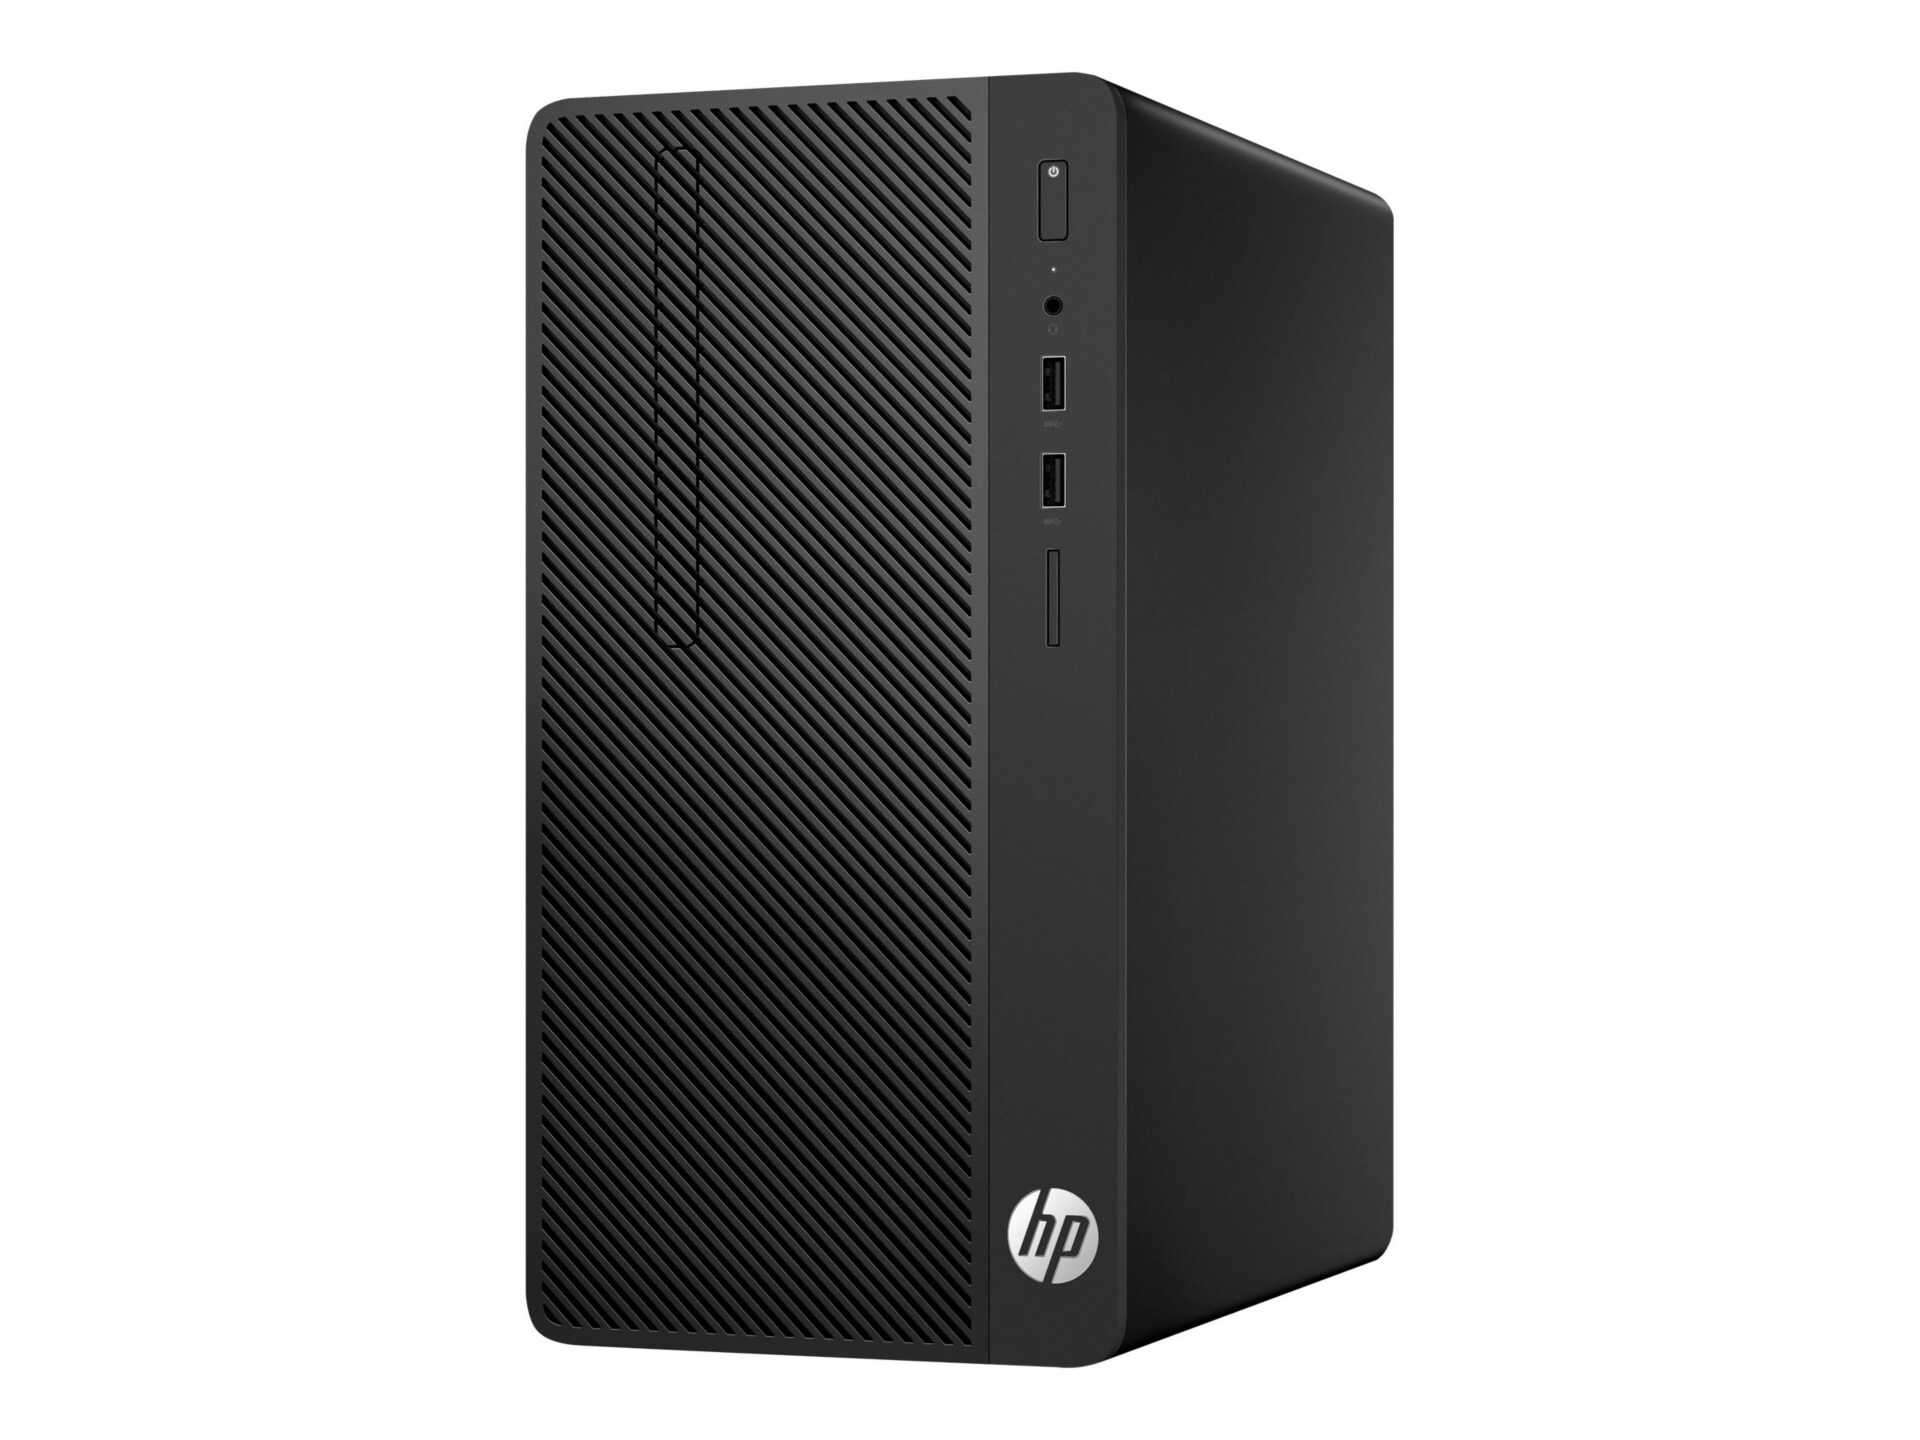 HP 280 G3 - micro tower - Core i3 6100 3.7 GHz - 4 GB - 500 GB - US